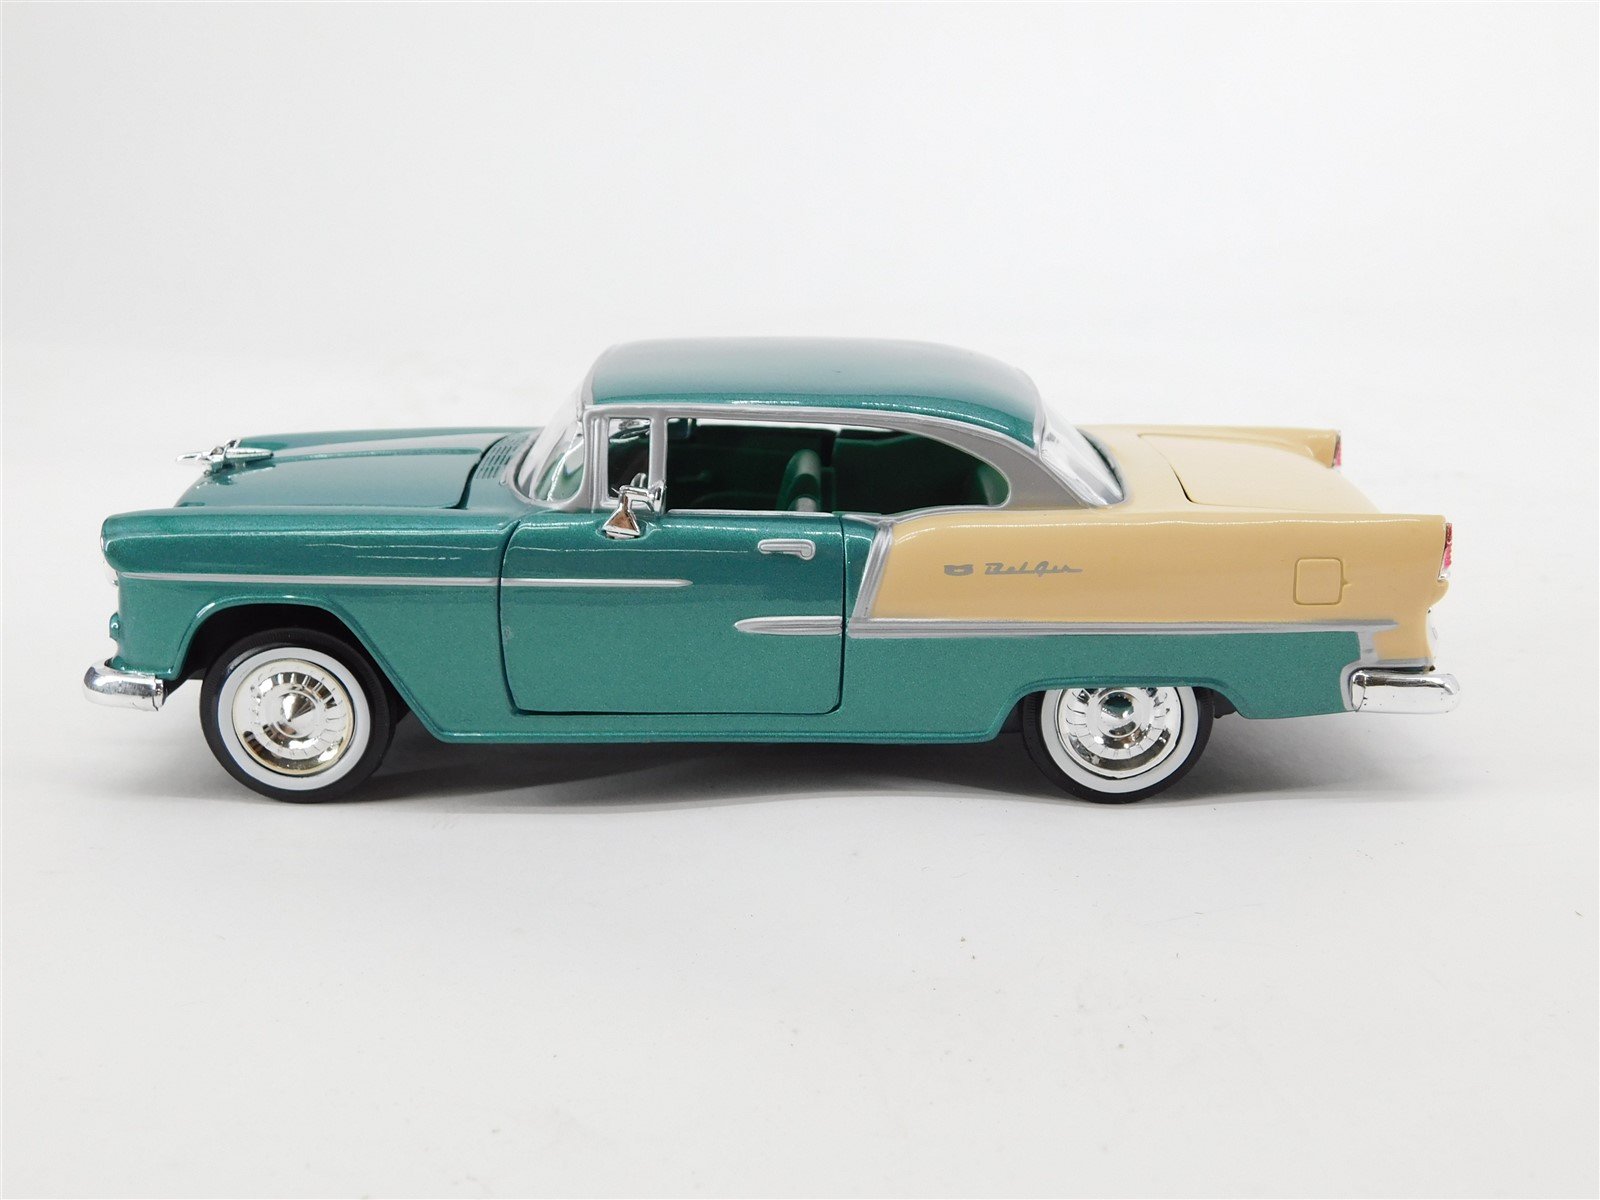 1:24 Scale Motor Max #73229 Die-Cast Automobile 1955 Chevy Bel Air - Green/Tan